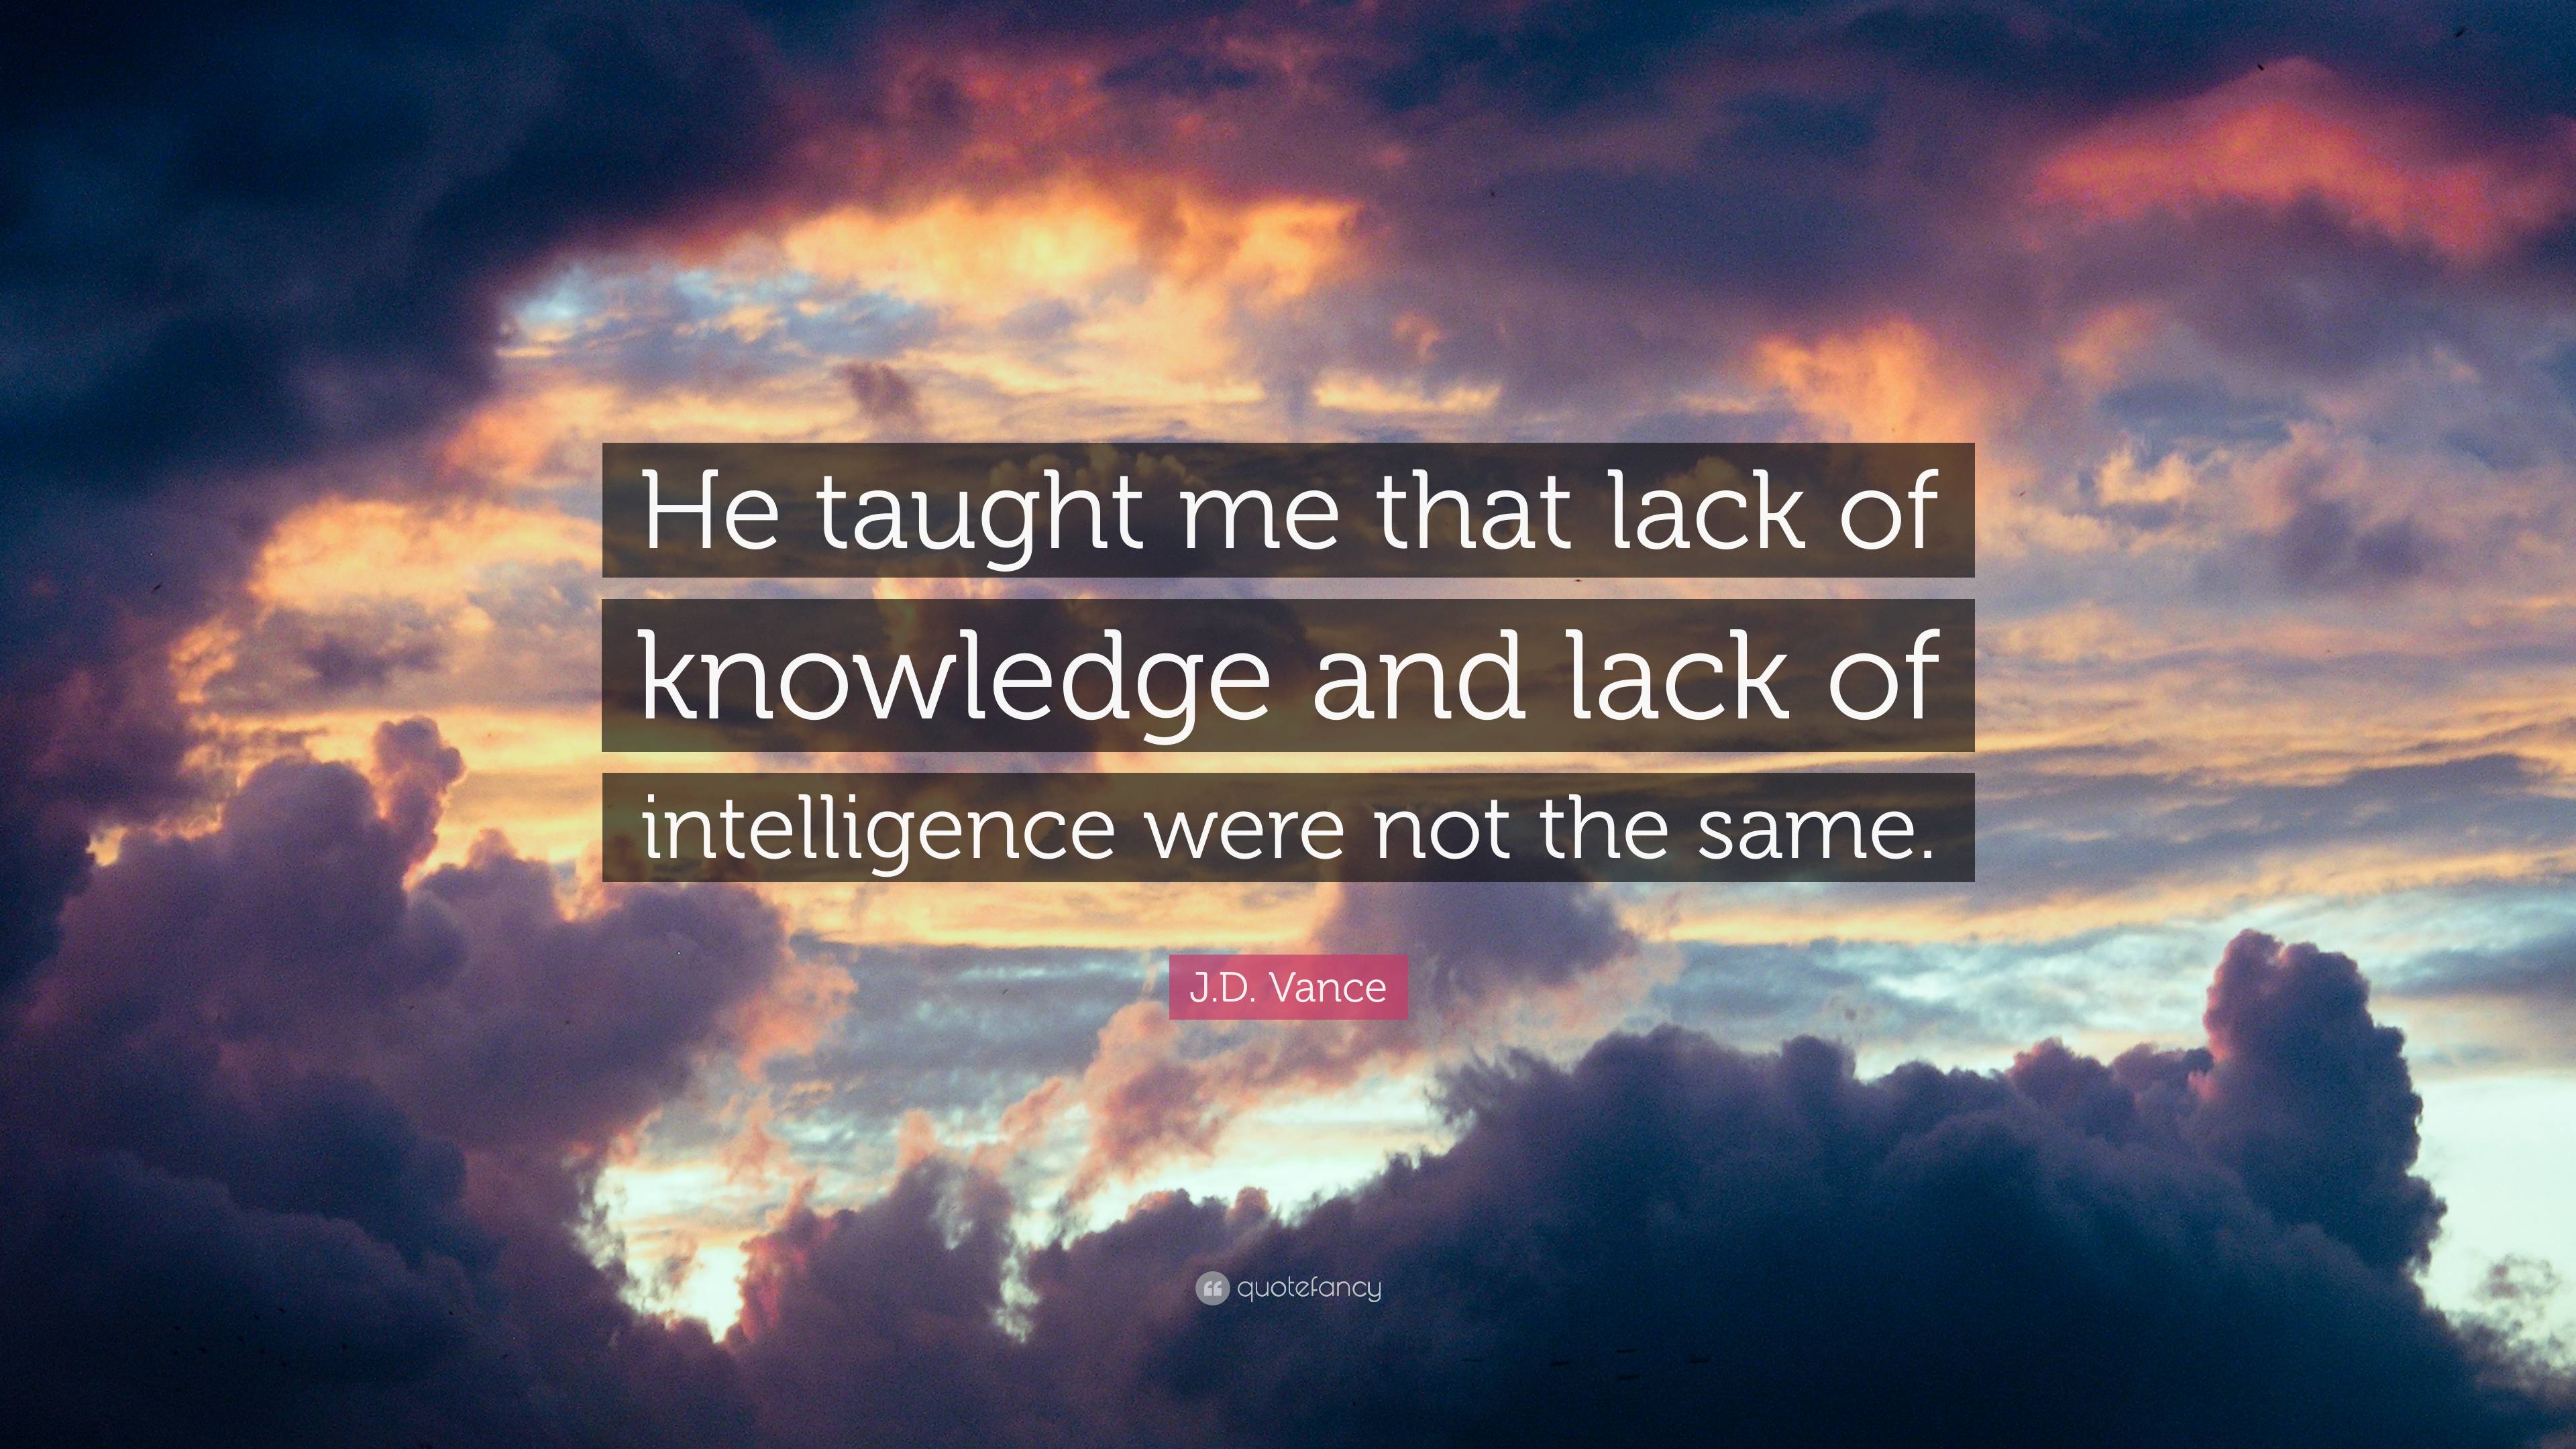 J.D. Vance Quote: “He taught me that lack of knowledge and lack of ...